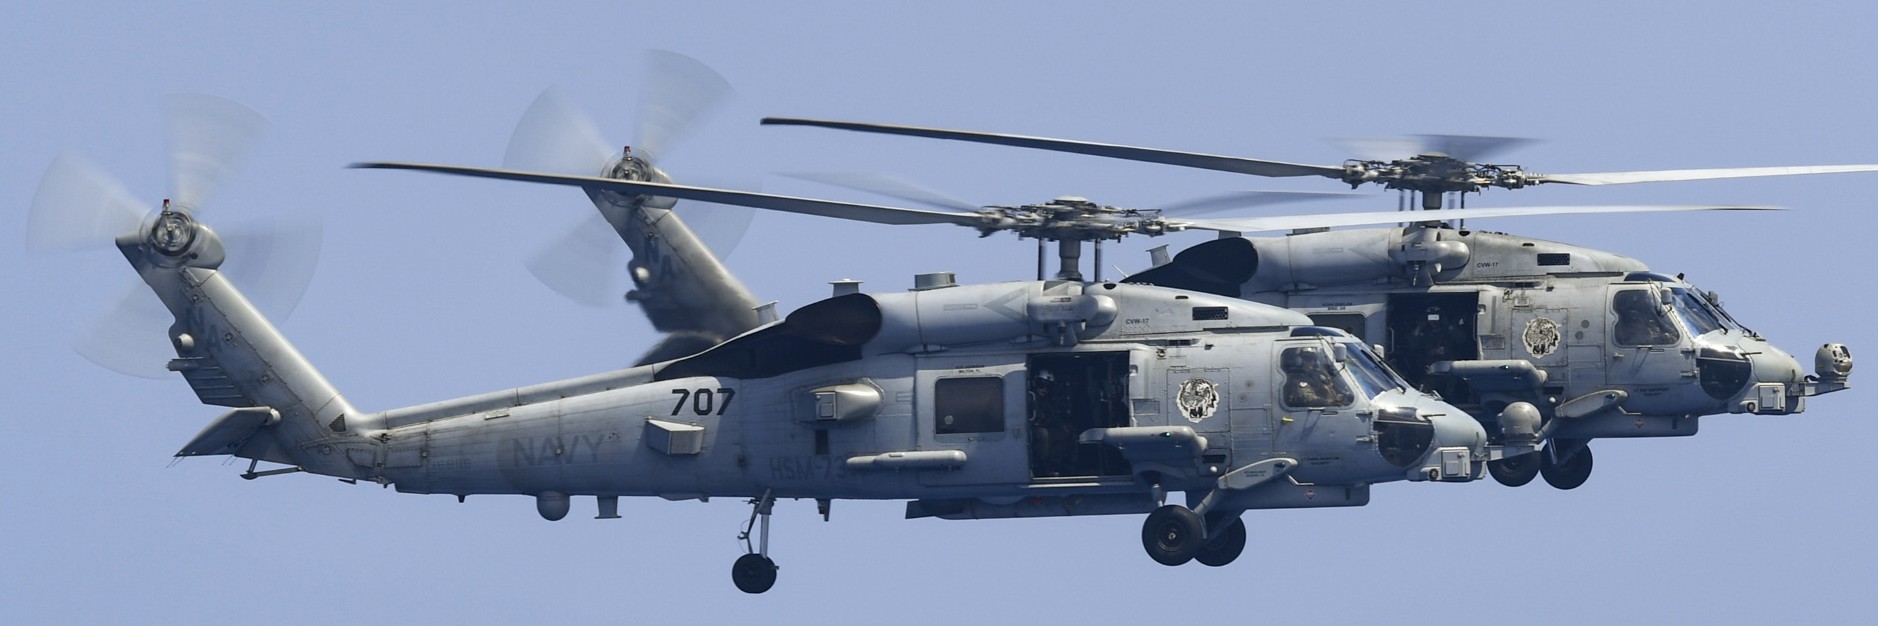 hsm-73 battlecats helicopter maritime strike squadron us navy mh-60r seahawk 2014 28